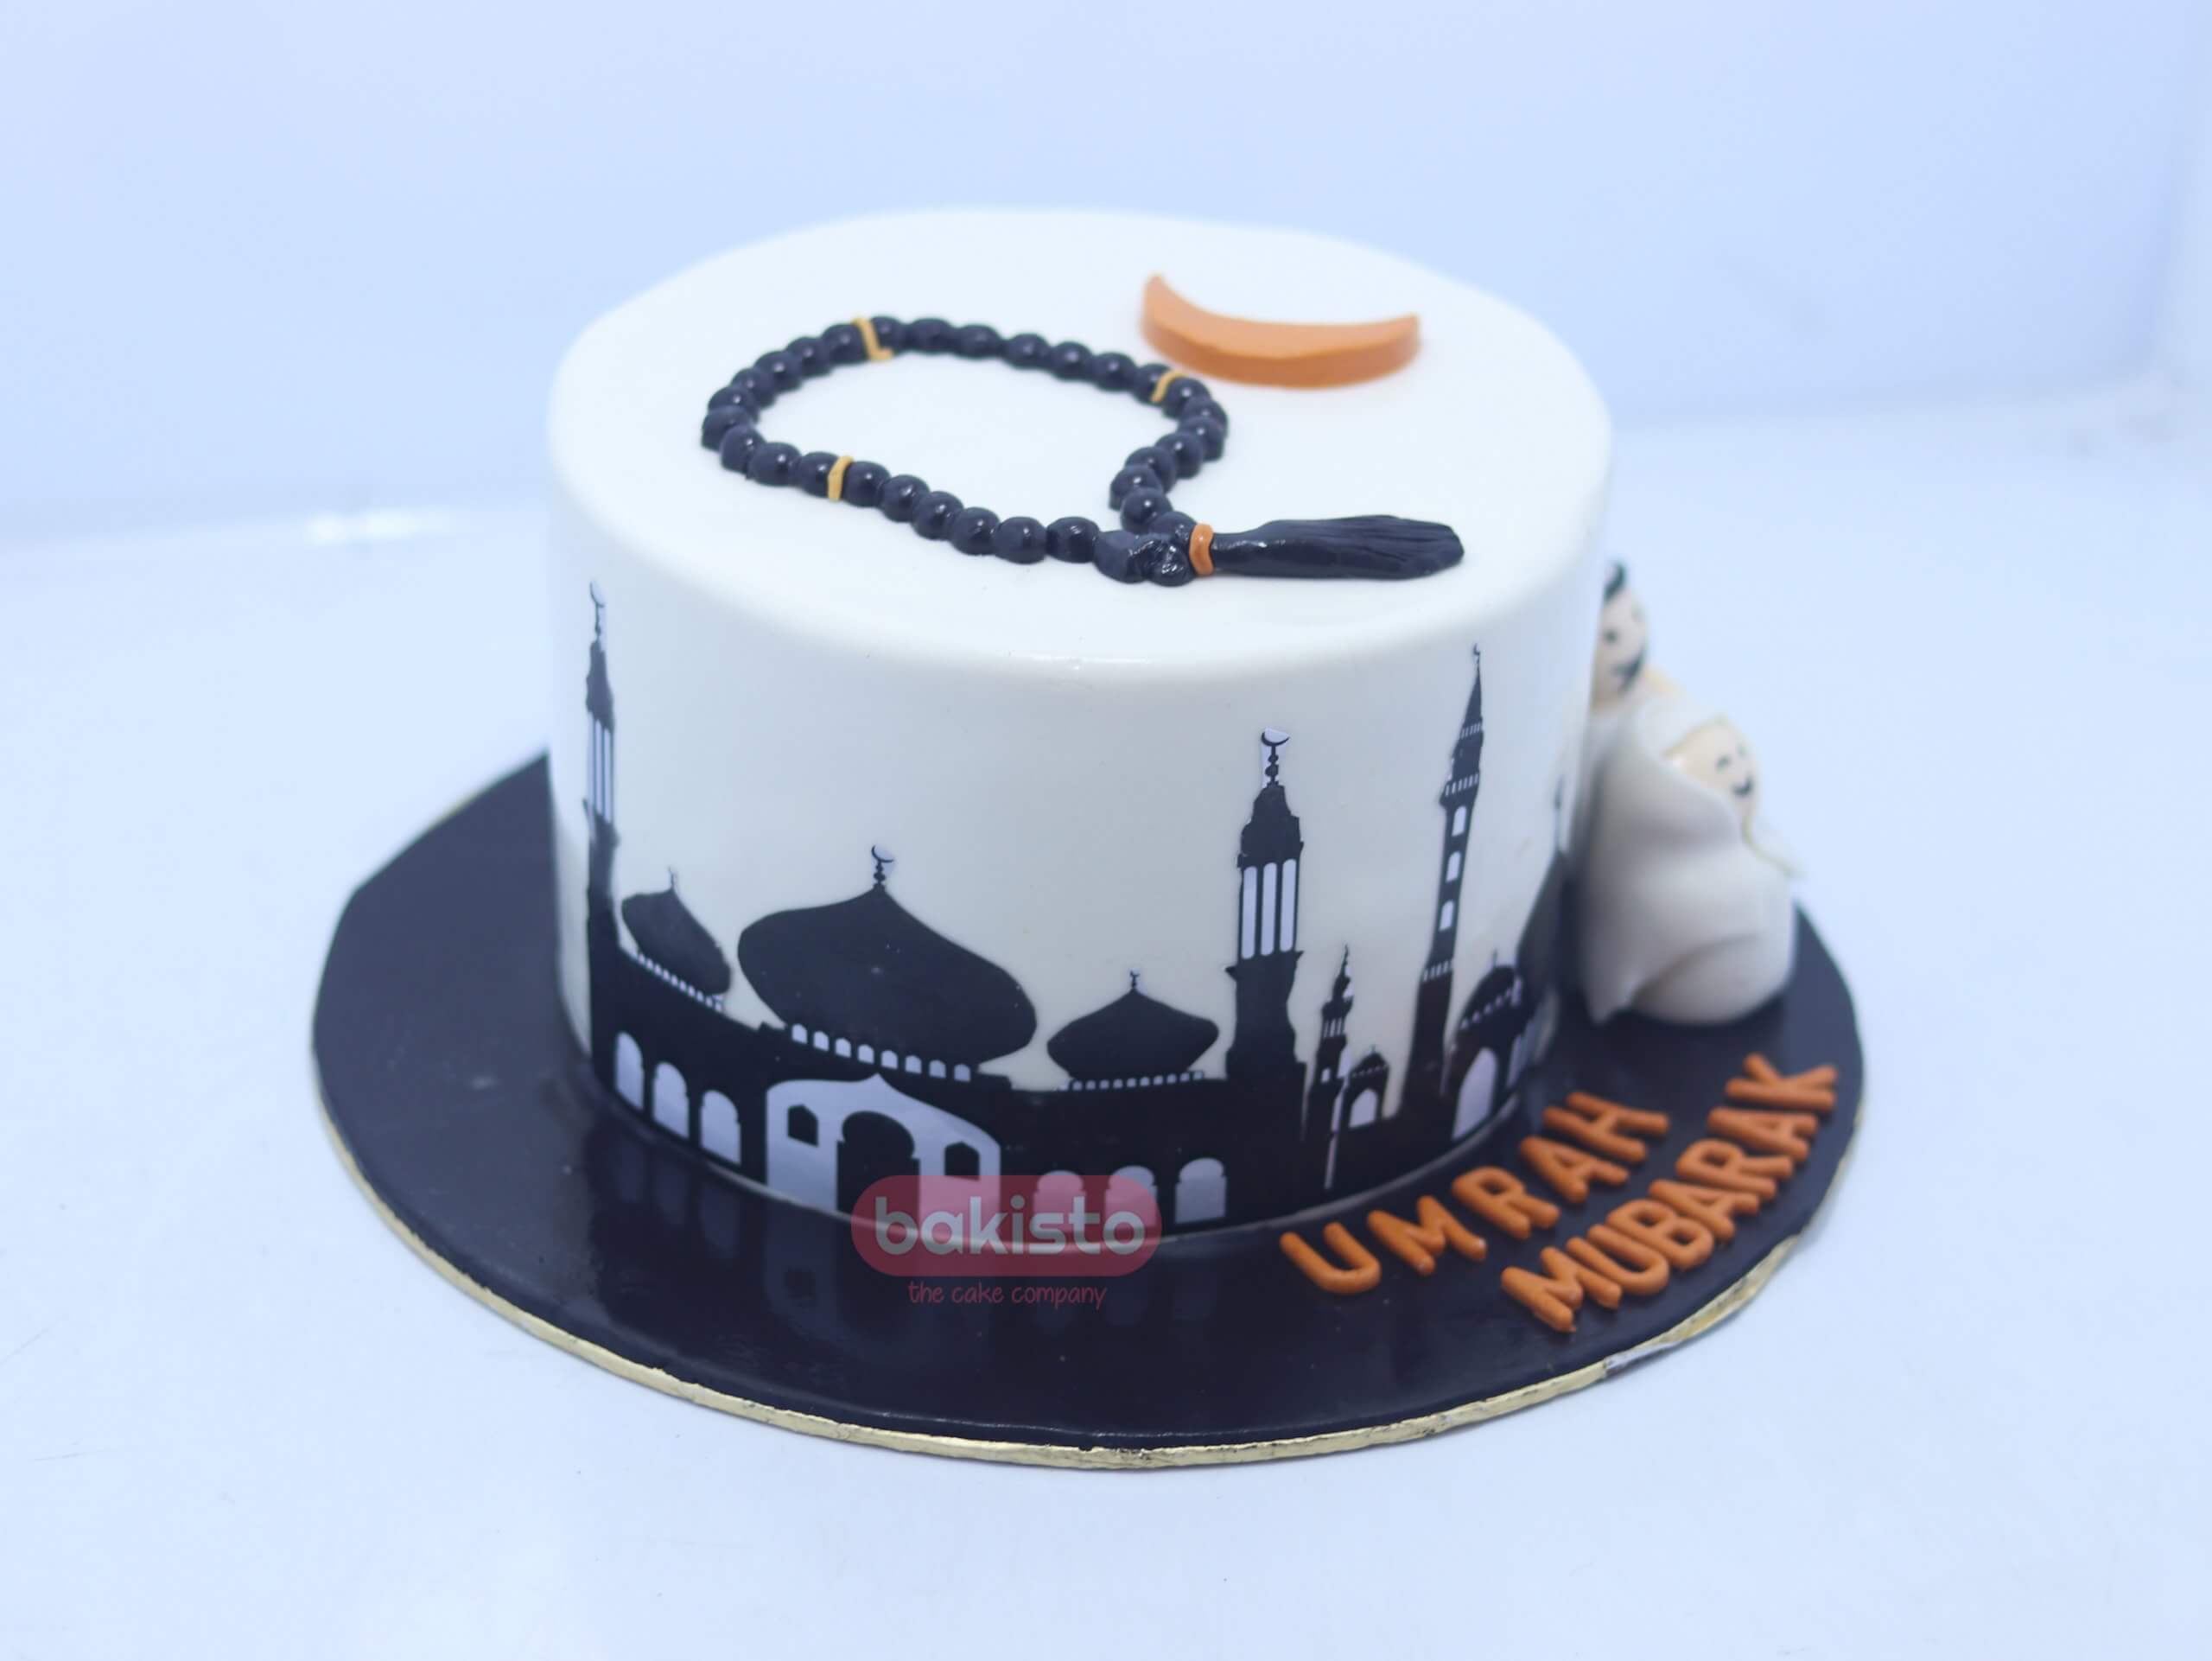 Cake Tools 3x5Inch Eid Cupcake Topper Nikkah Mubarak Eid Mubarak Hajj  Mubarak Umrah Mubarak Cupcake Topper For Eid Al Fitr Decoration 231129 From  Kong09, $10.1 | DHgate.Com